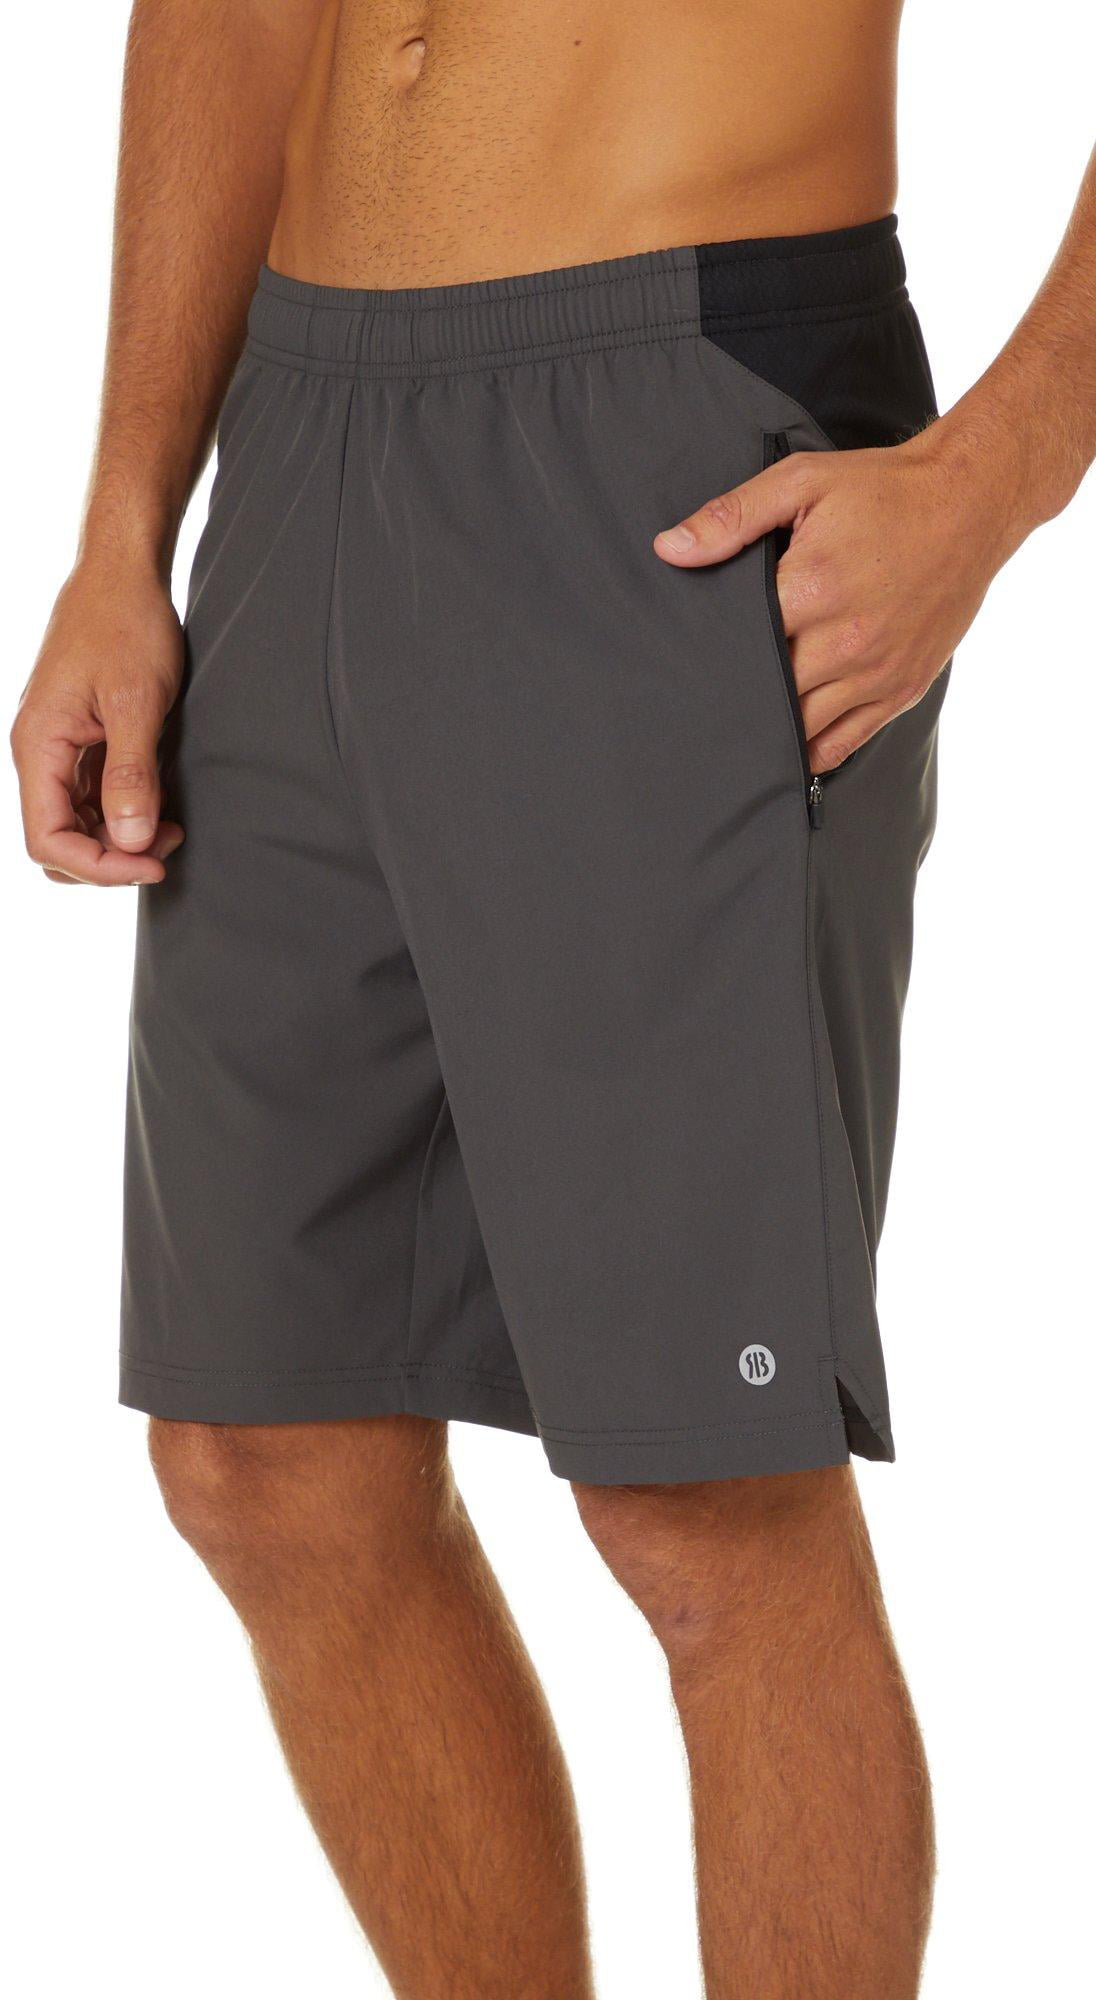 Simple Walmart Mens Workout Shorts for Burn Fat fast